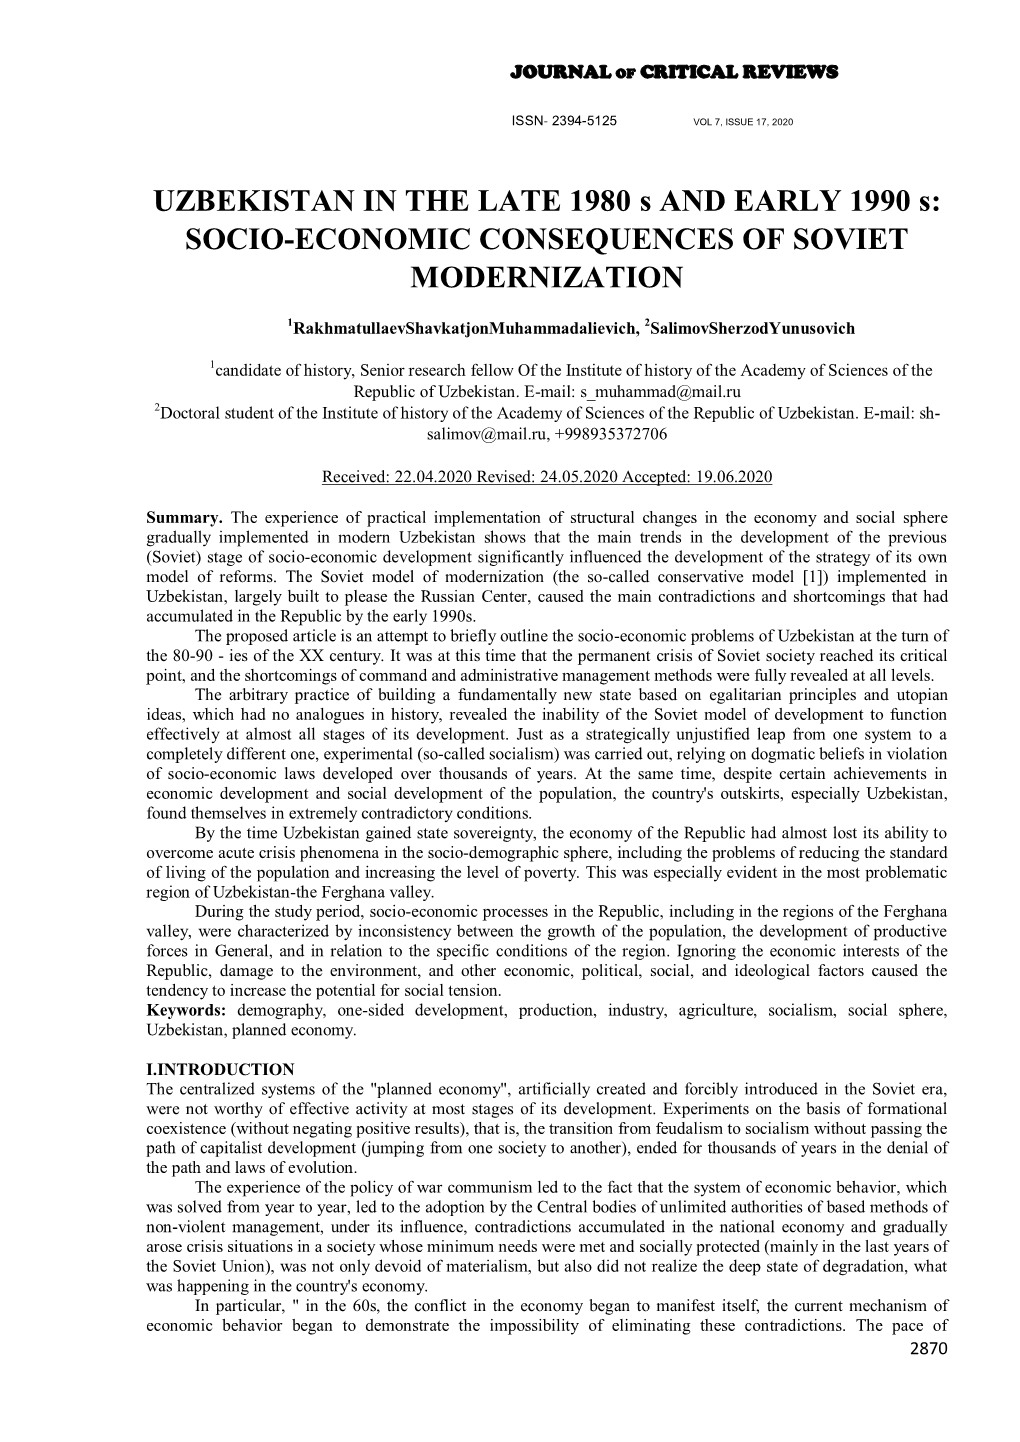 UZBEKISTAN in the LATE 1980 S and EARLY 1990 S: SOCIO-ECONOMIC CONSEQUENCES of SOVIET MODERNIZATION